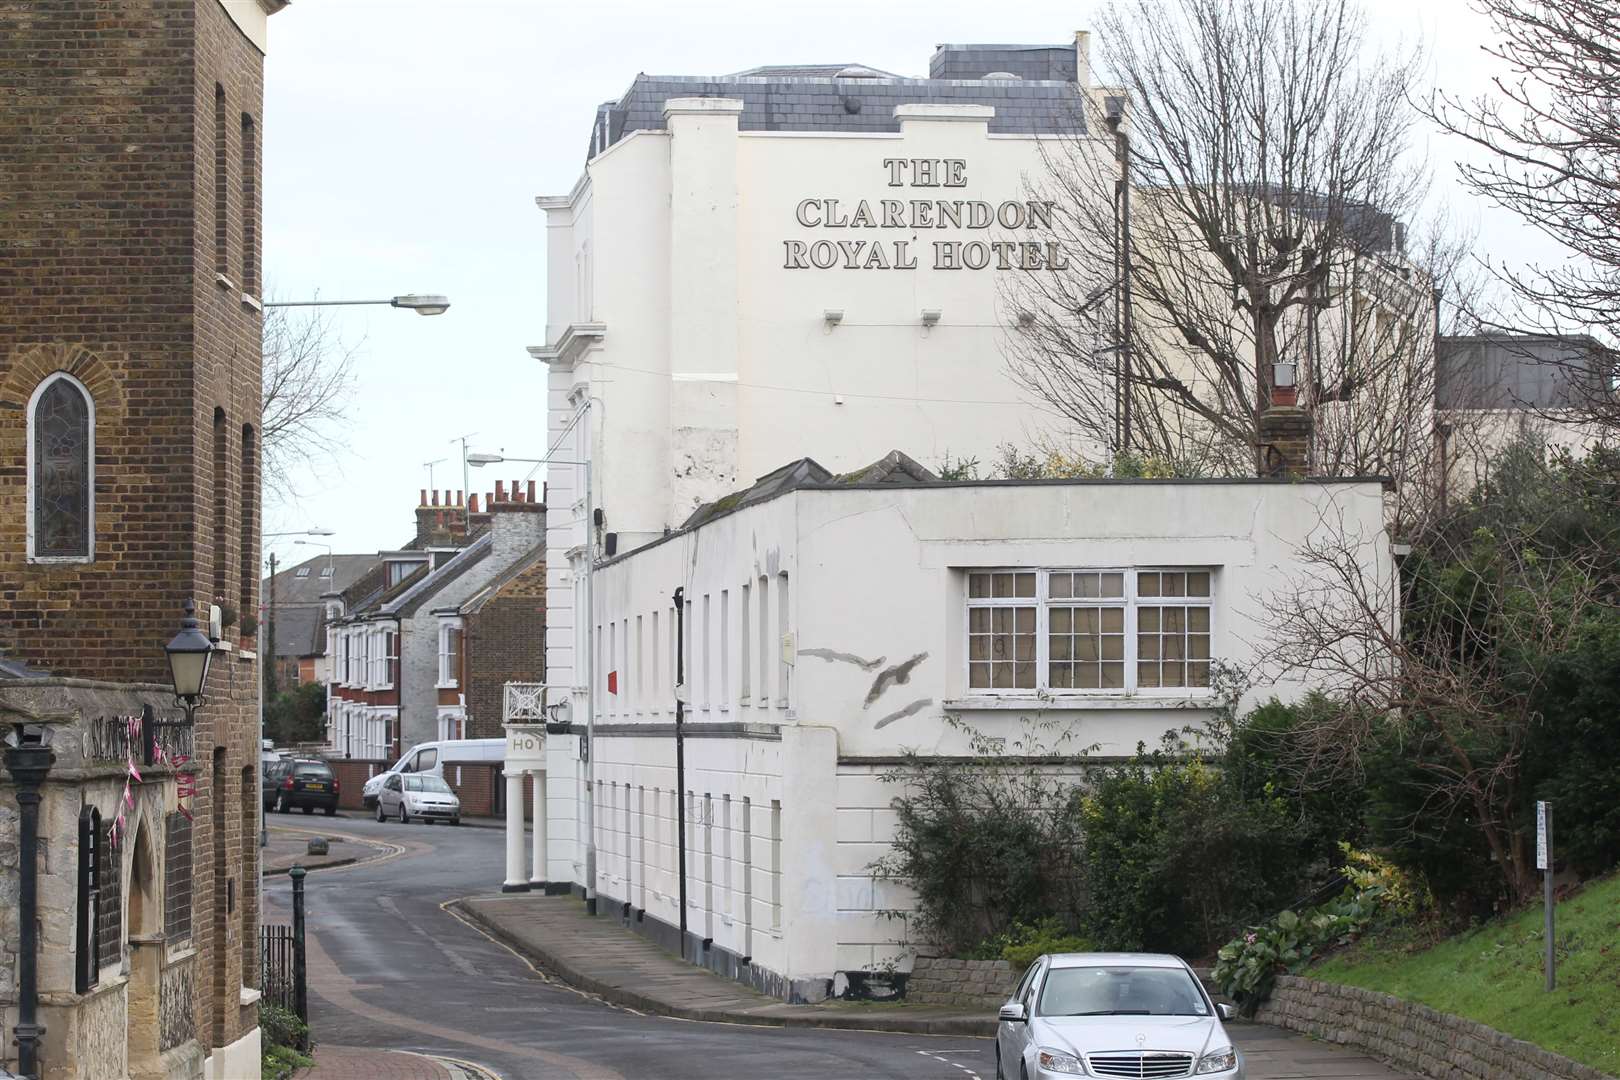 The Clarendon Royal Hotel. Picture: John Westhrop